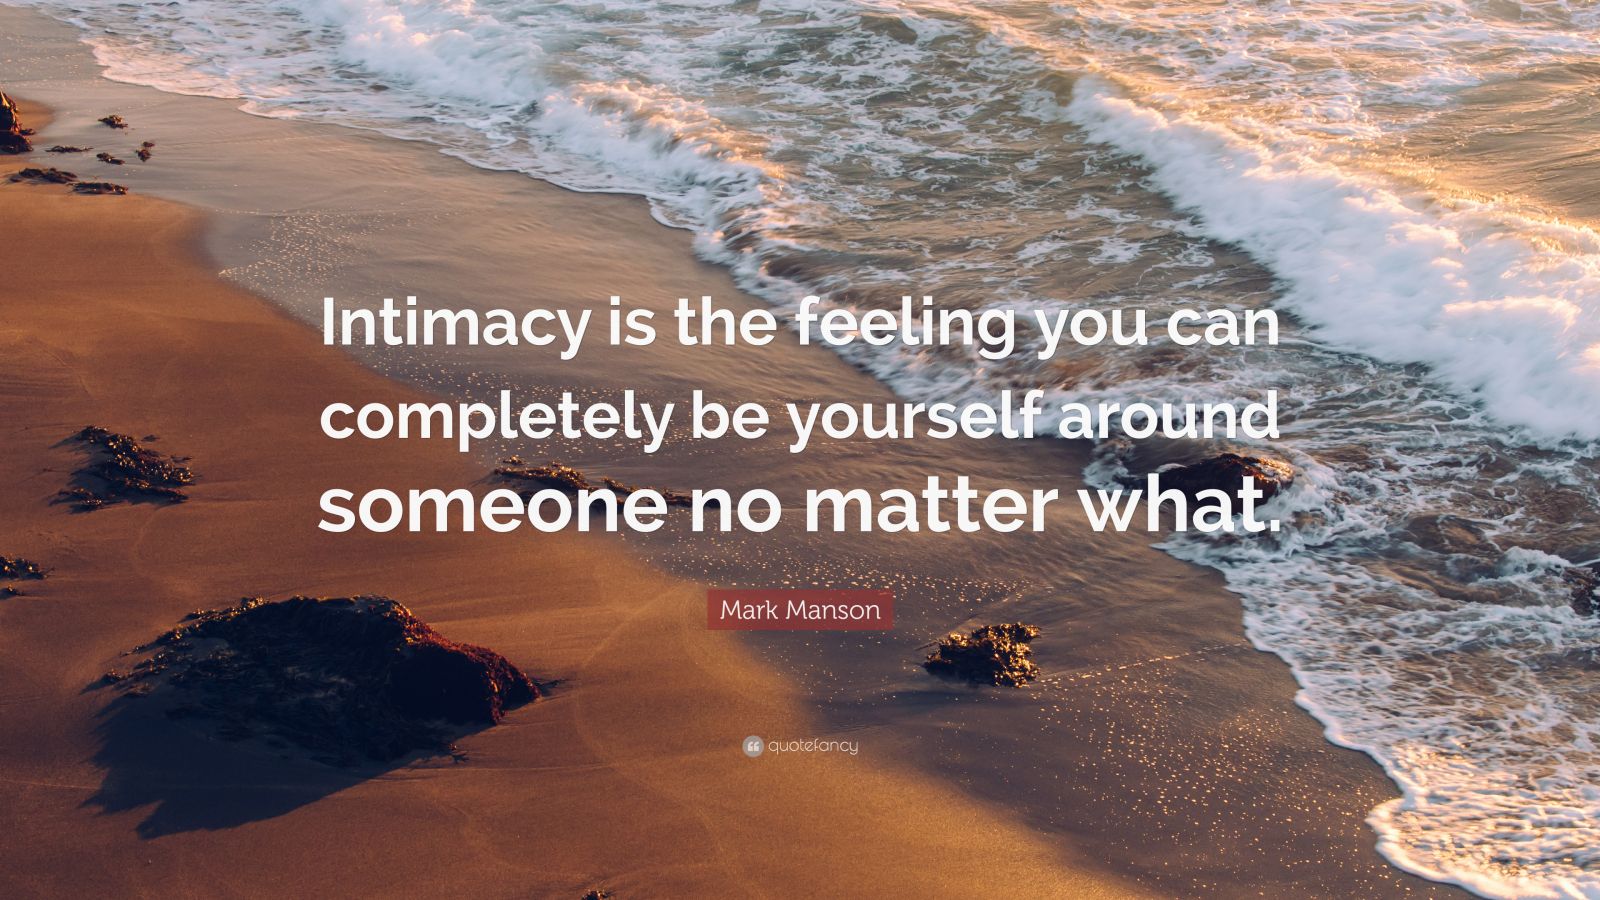 Mark Manson Quote: “Intimacy is the feeling you can completely be ...